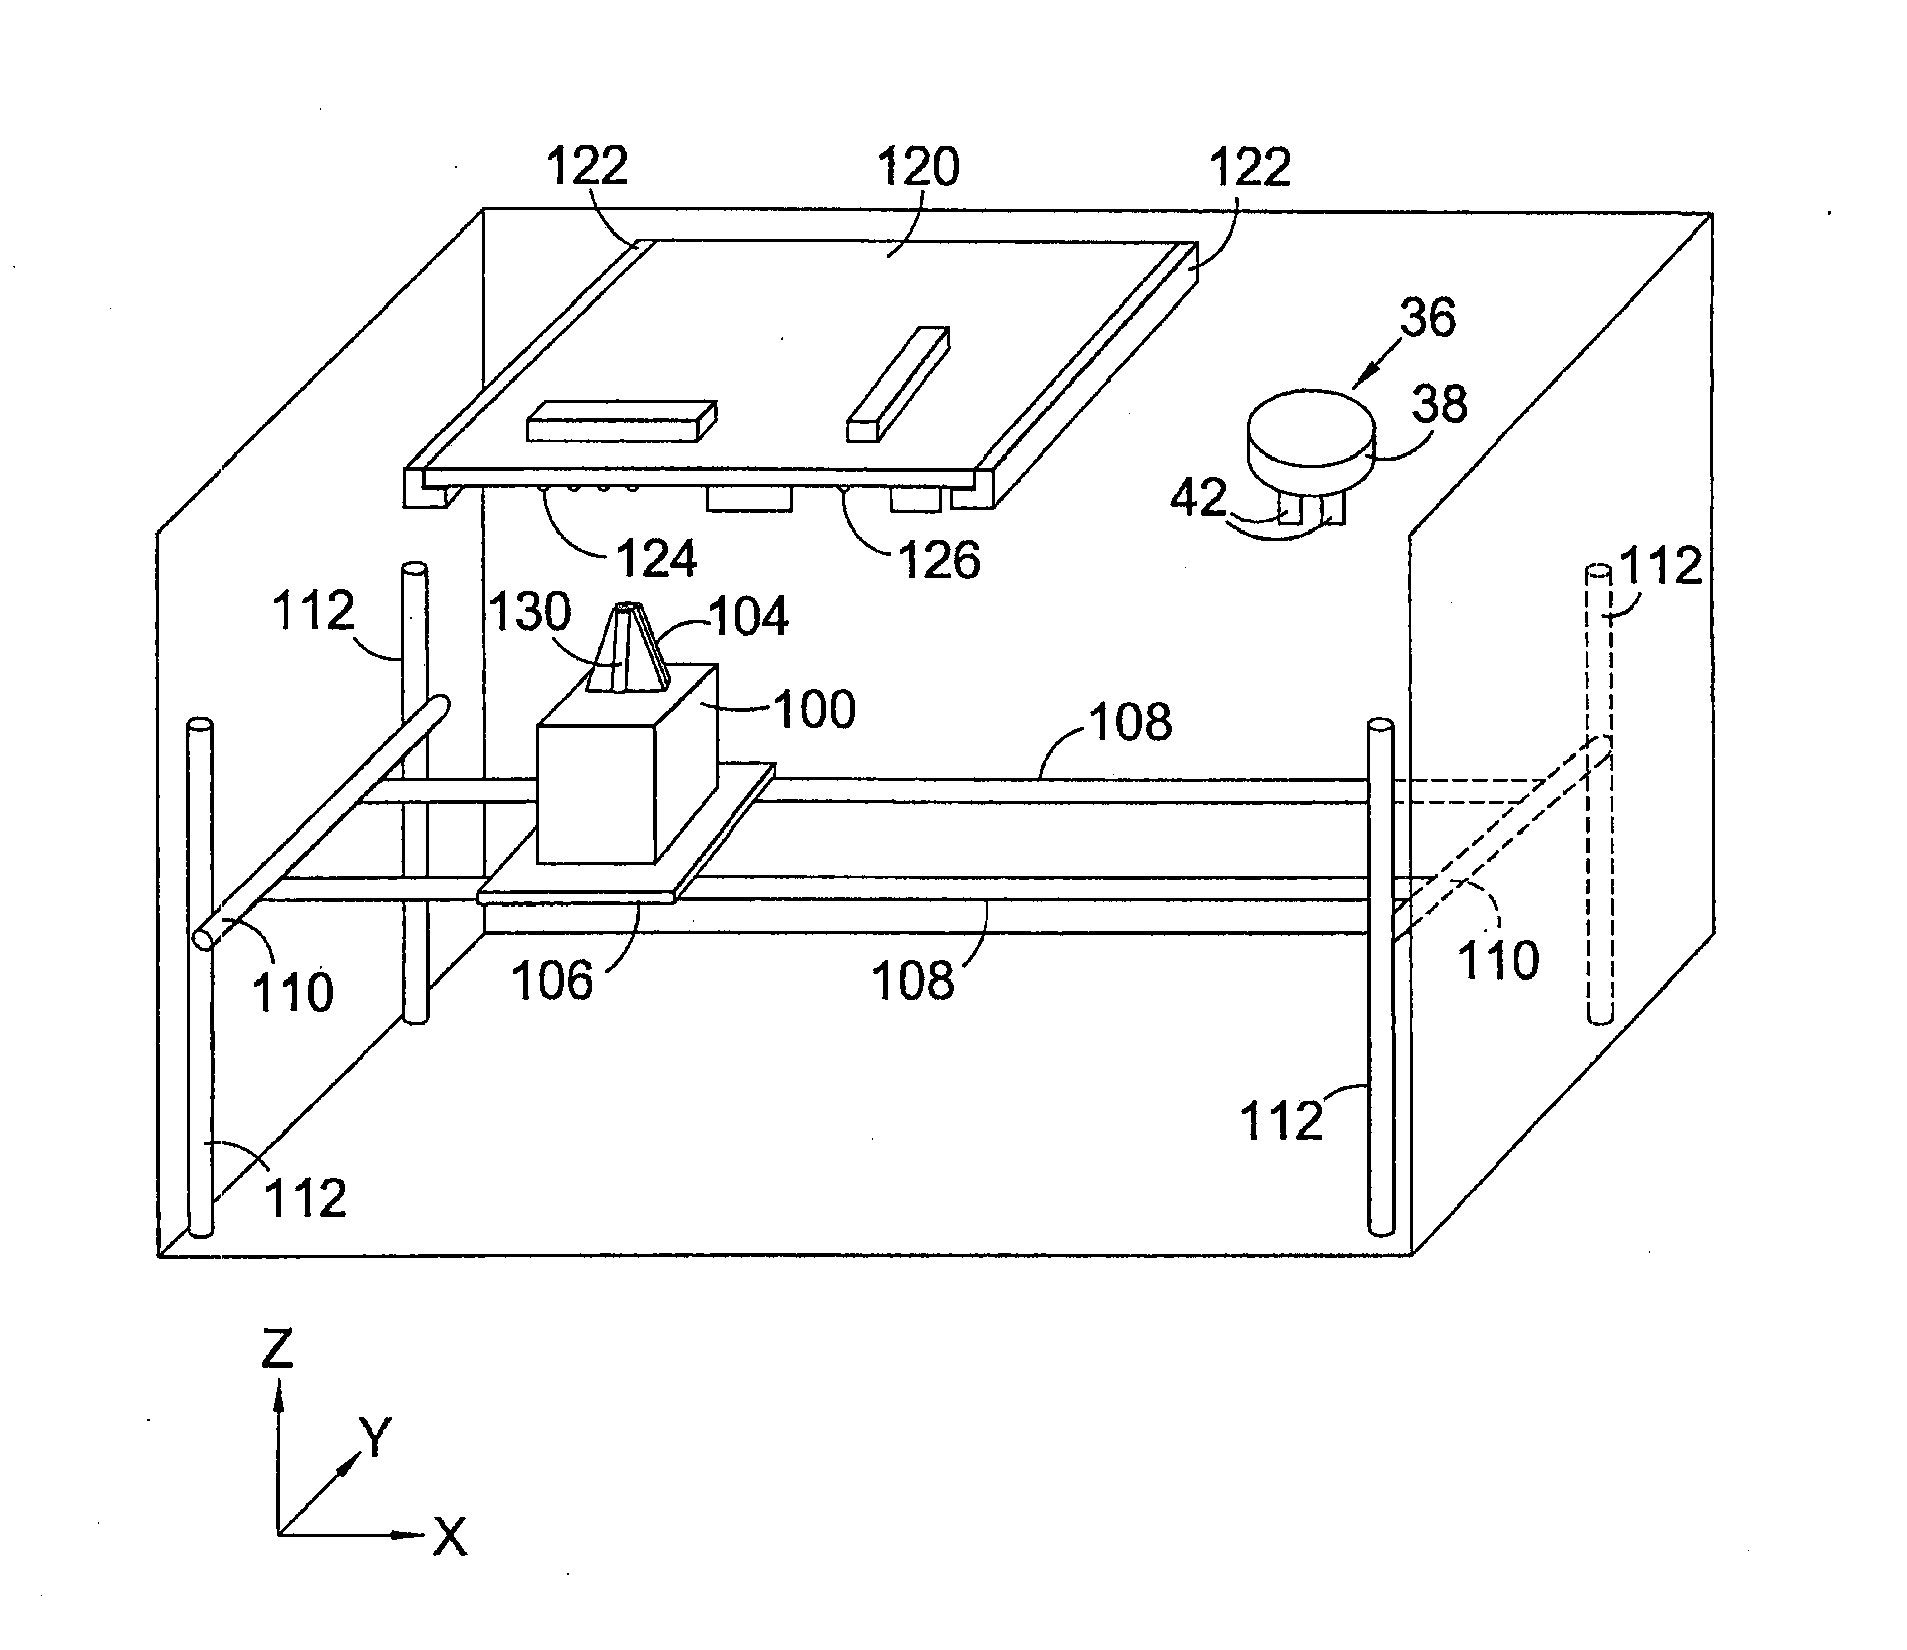 Selective soldering apparatus with jet wave solder jet and nitrogen preheat